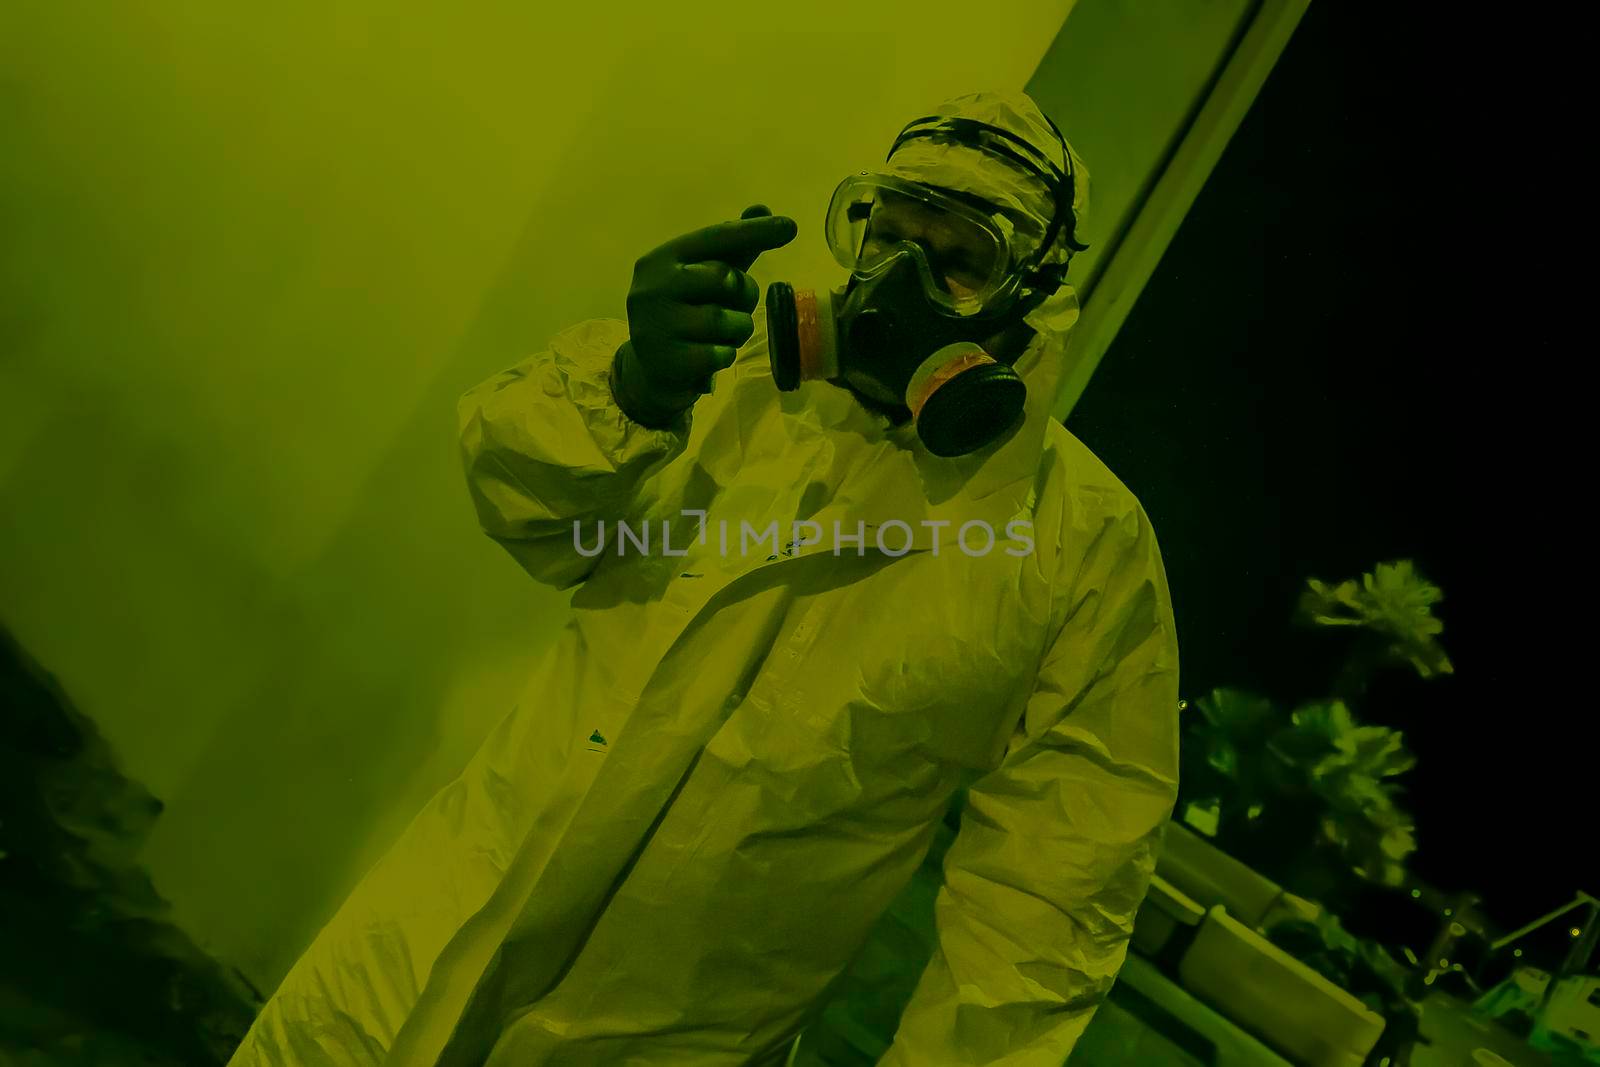 Health worker with antiviral suit and gas mask